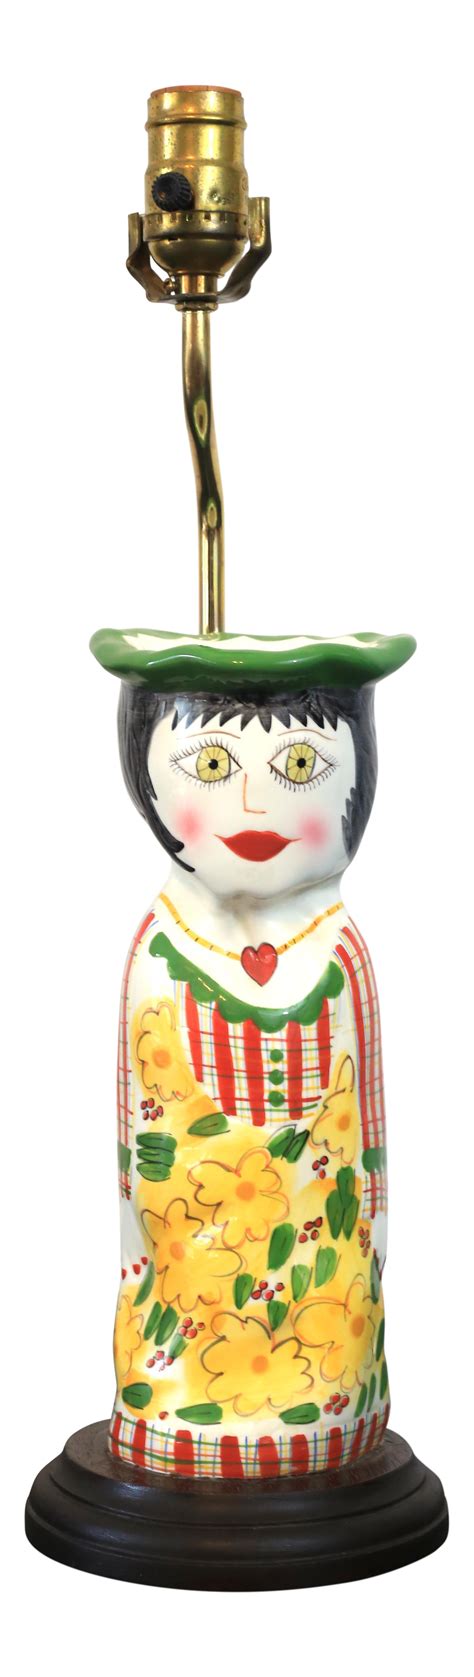 Ceramic Hand-Painted Woman With Flowers Table Lamp on Chairish.com | Ceramic figures, Table lamp ...